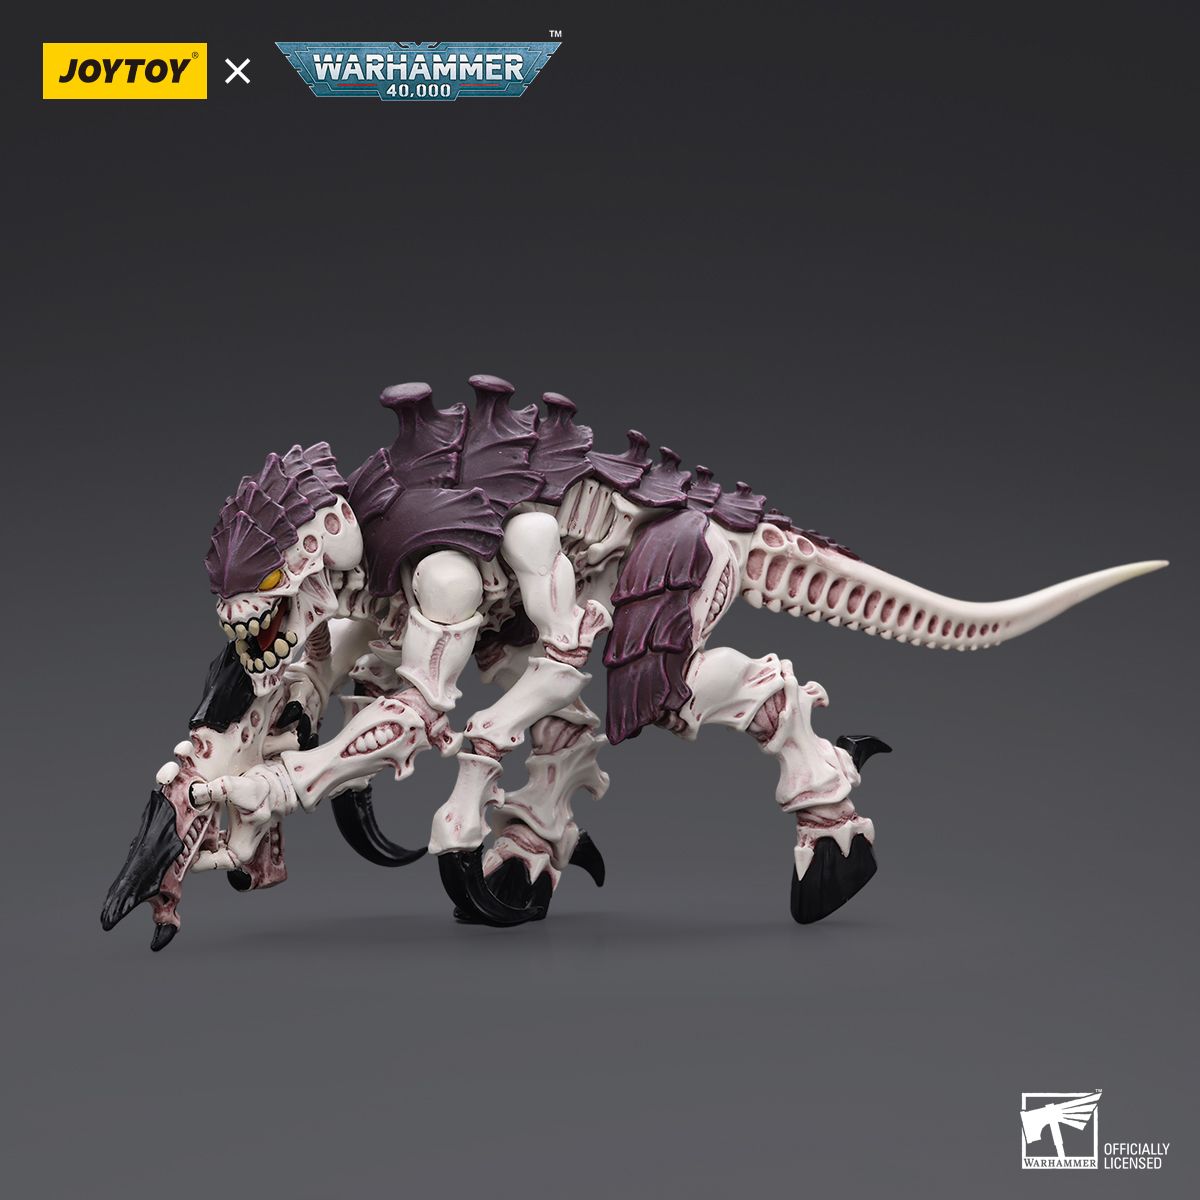 Warhammer Collectibles: 1/18 Scale Tyranids Hive Fleet Leviathan Termagant with Fleshborer (Preorder)